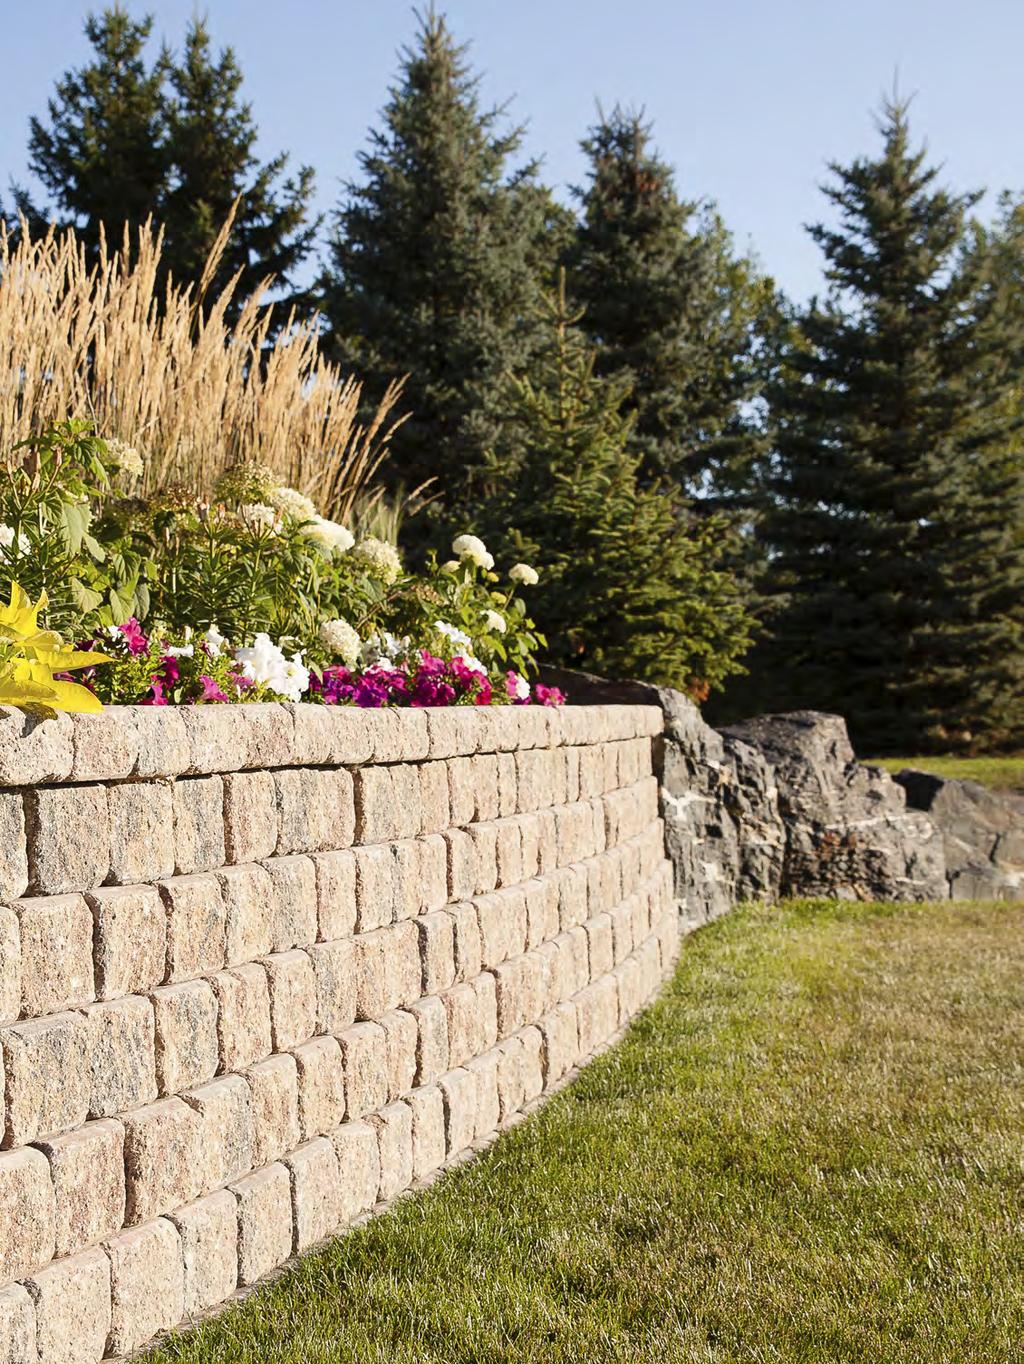 Retaining walls Barkman s wide selection of retaining walls are as versatile as